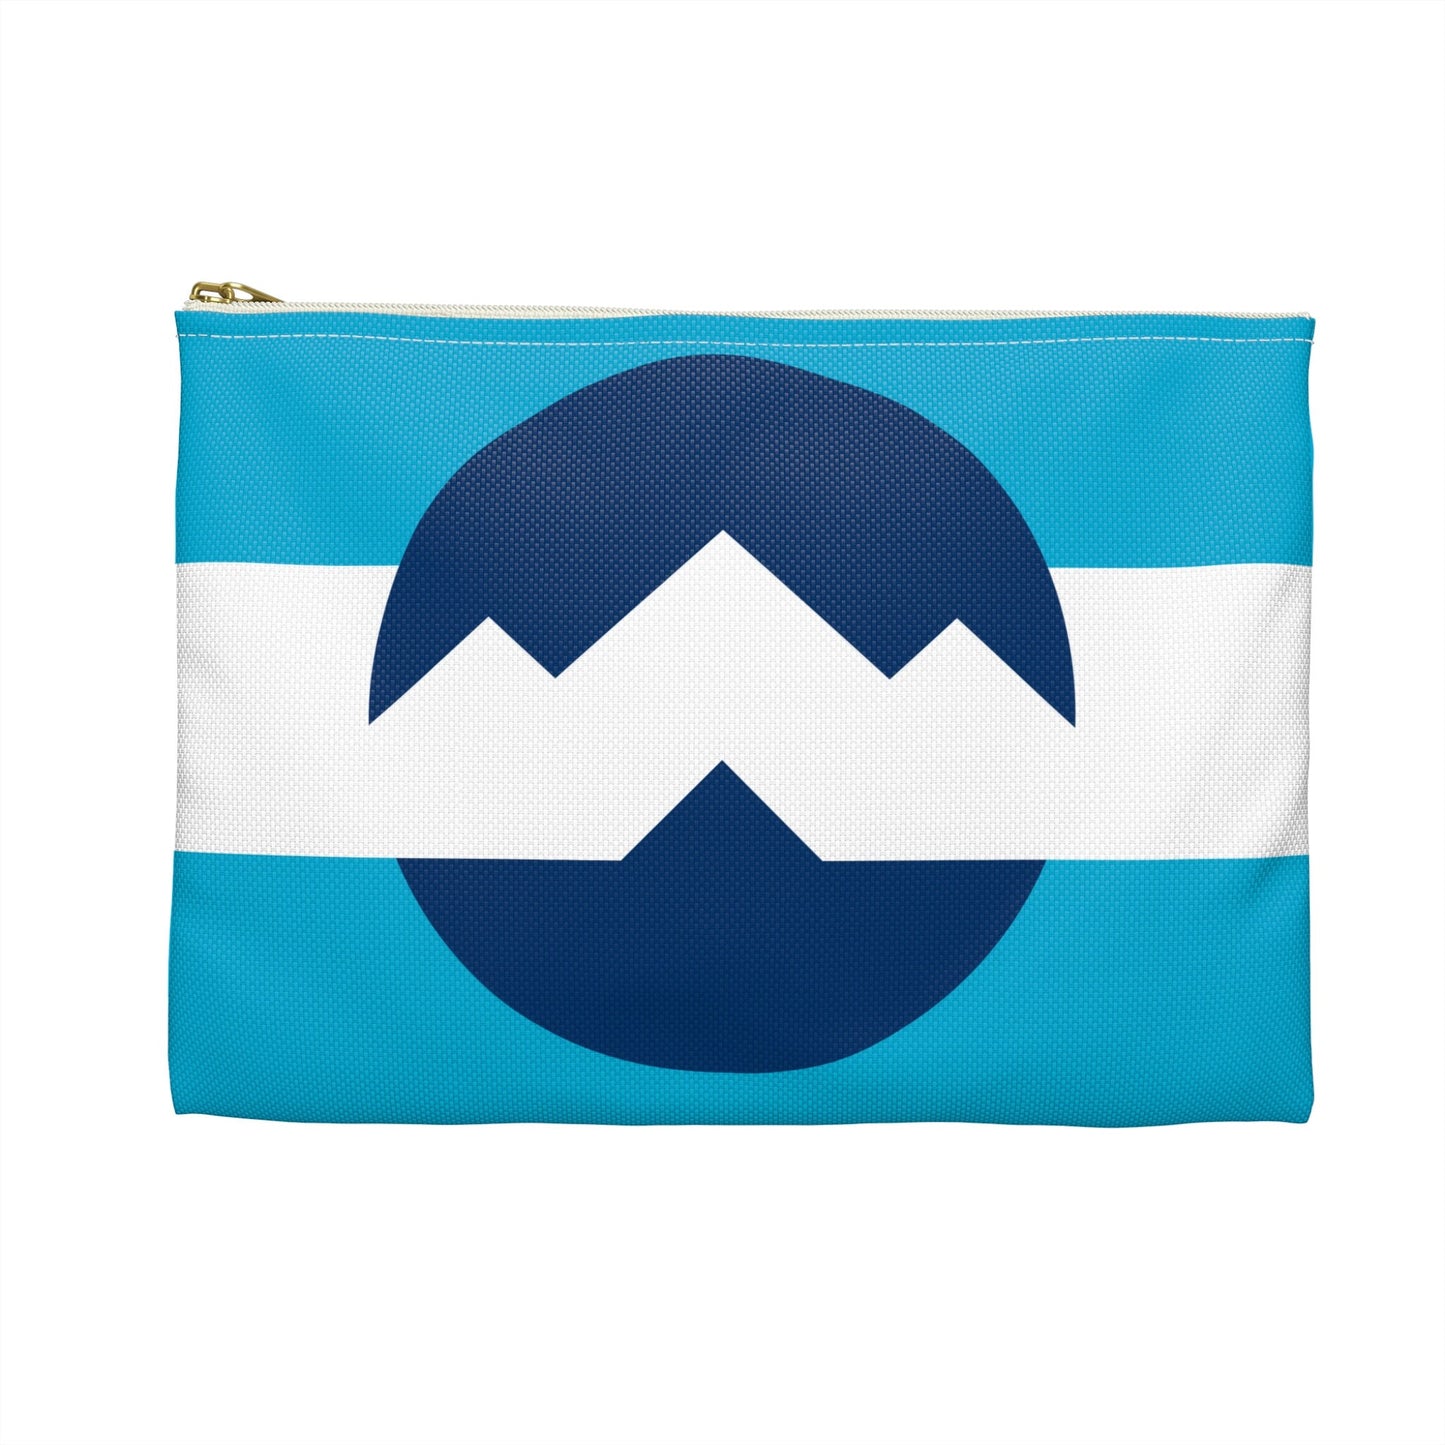 Ogden Utah Flag Accessory Pouch, Great for cosmetic travel bag or for the student or teacher gift